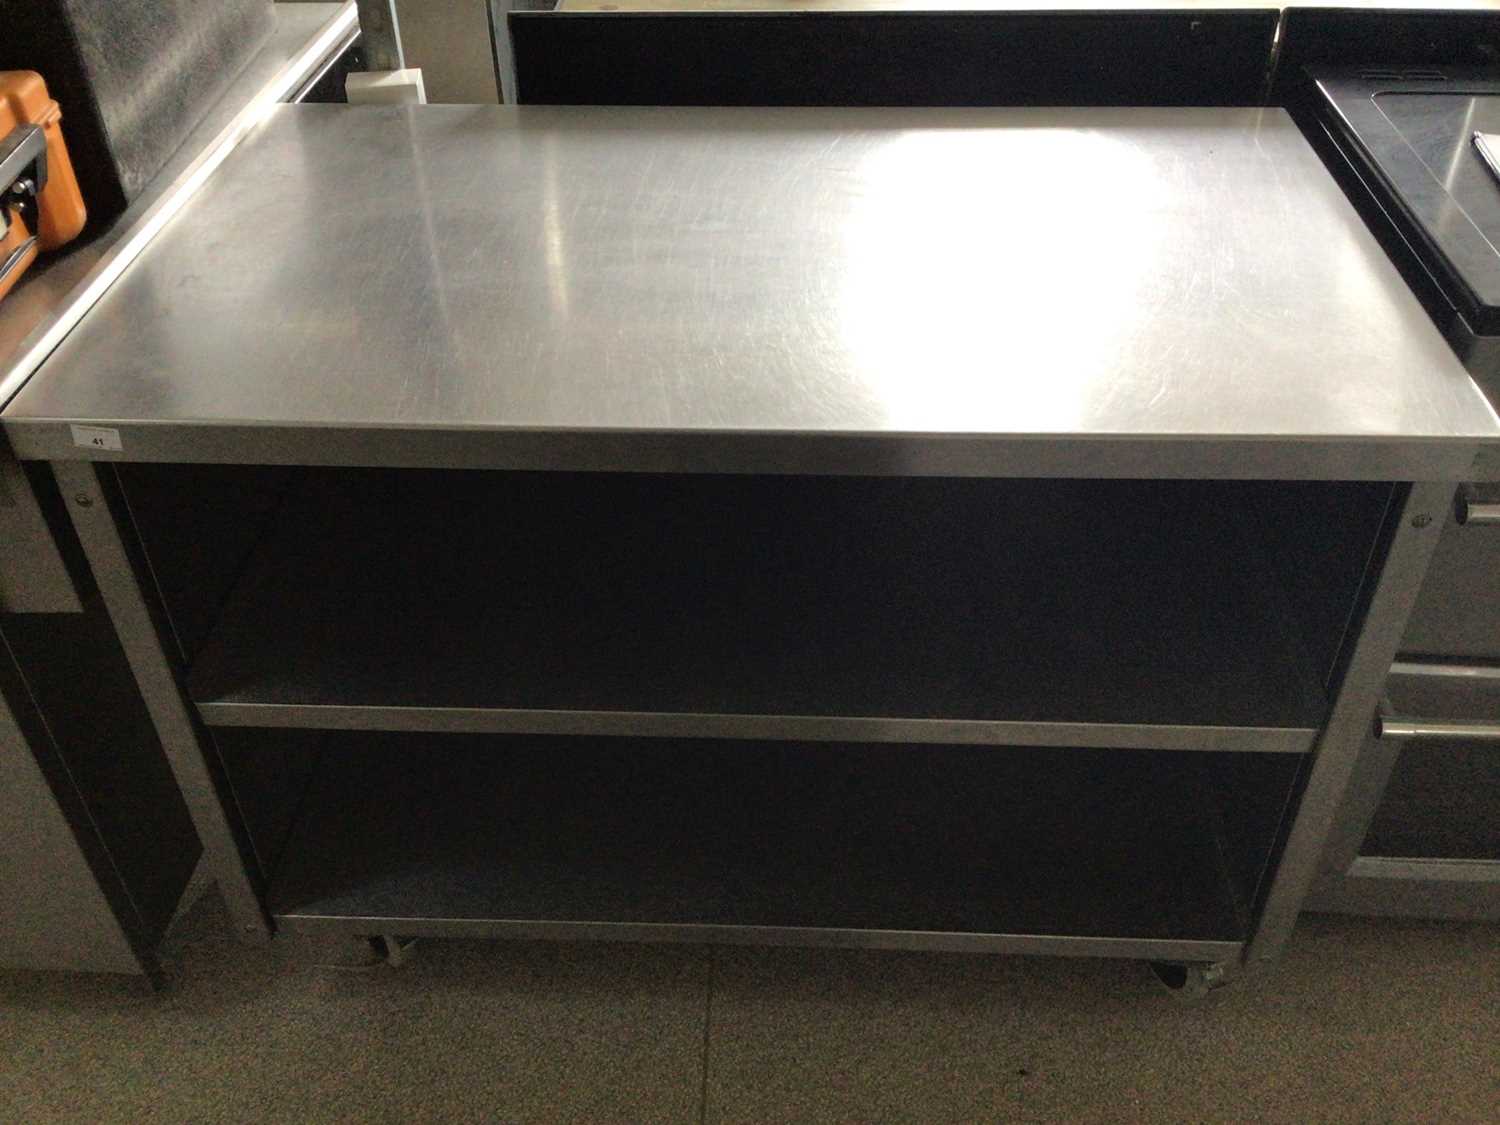 Lot 41 - A freestanding stainless steel preparation bench, with two shelves under, on castors, 1200 mm